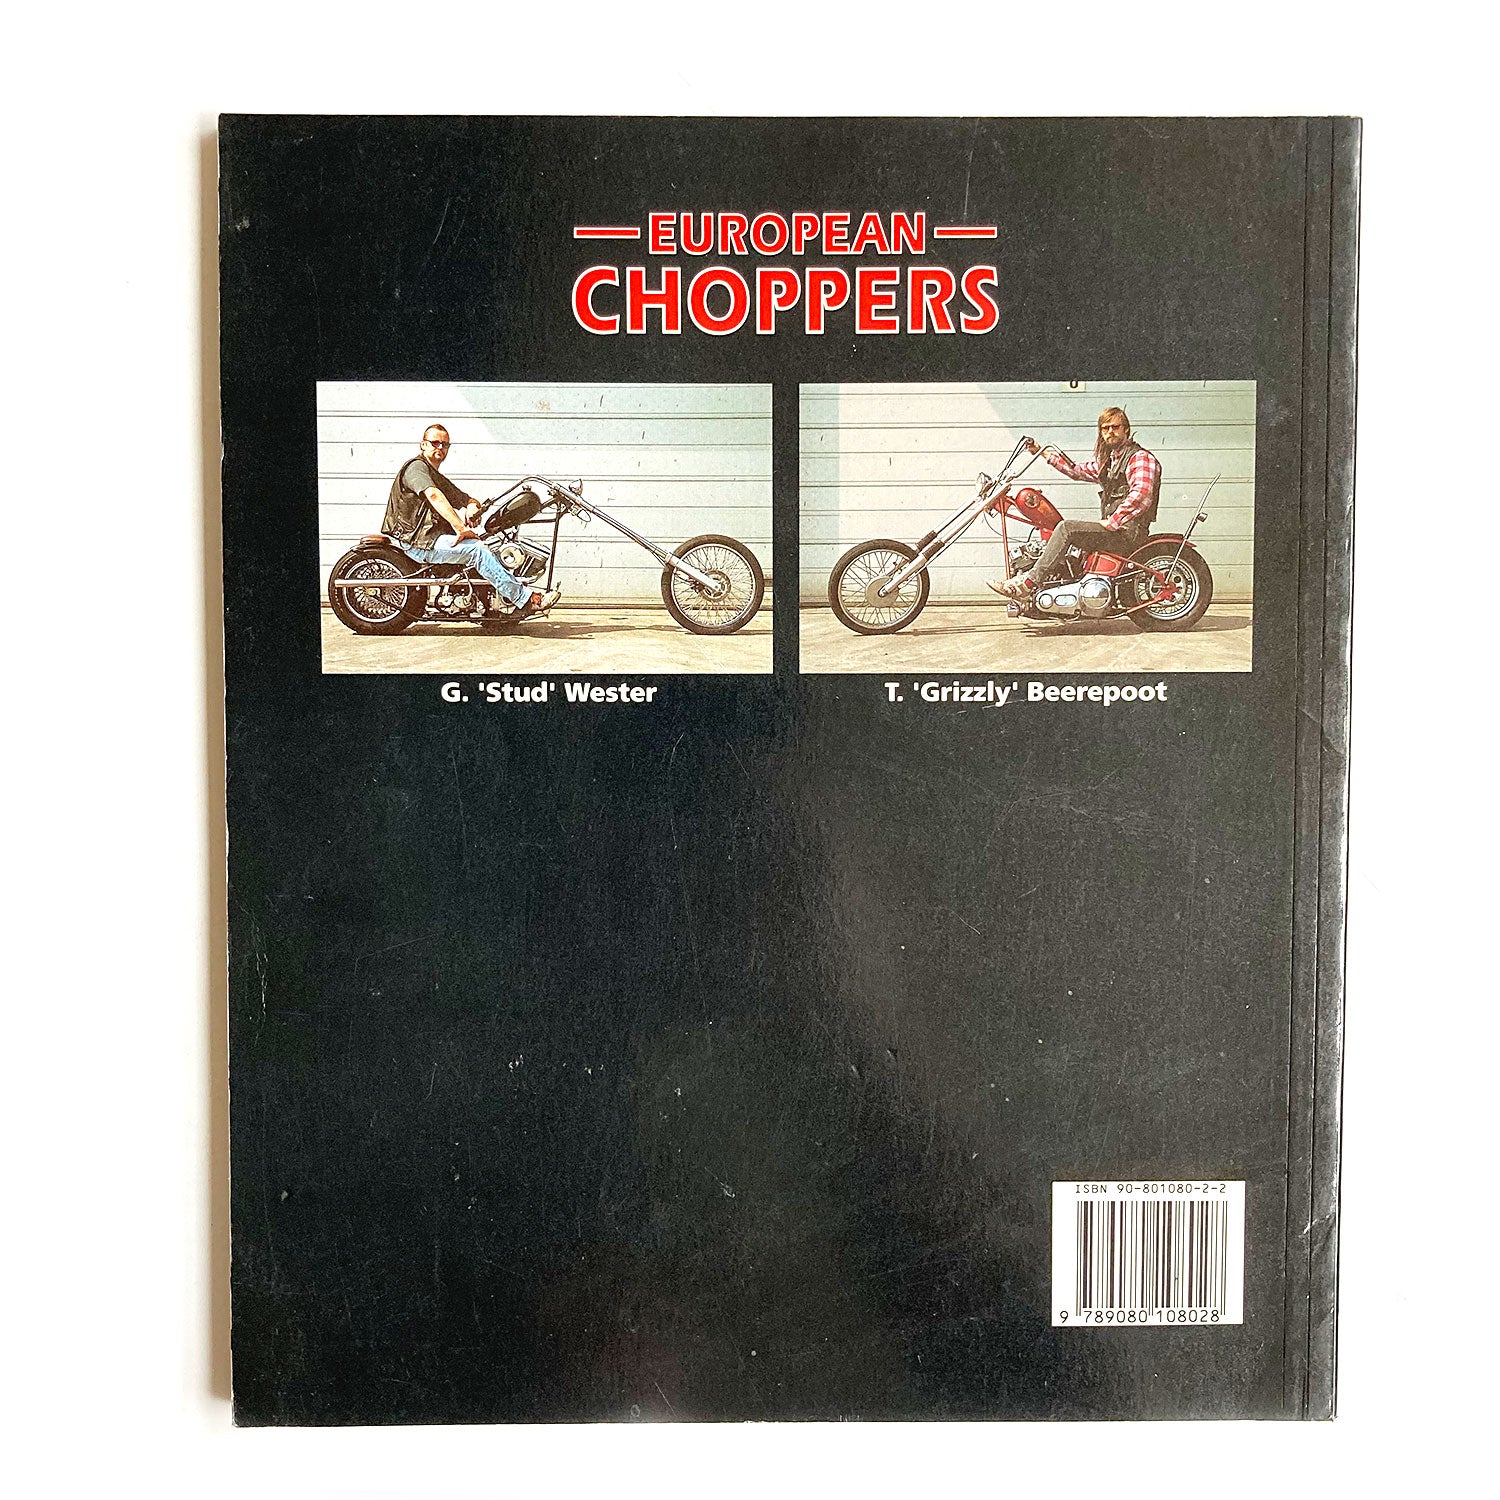 European Choppers soft cover book by T. Grizzly Beerepoot, 1993